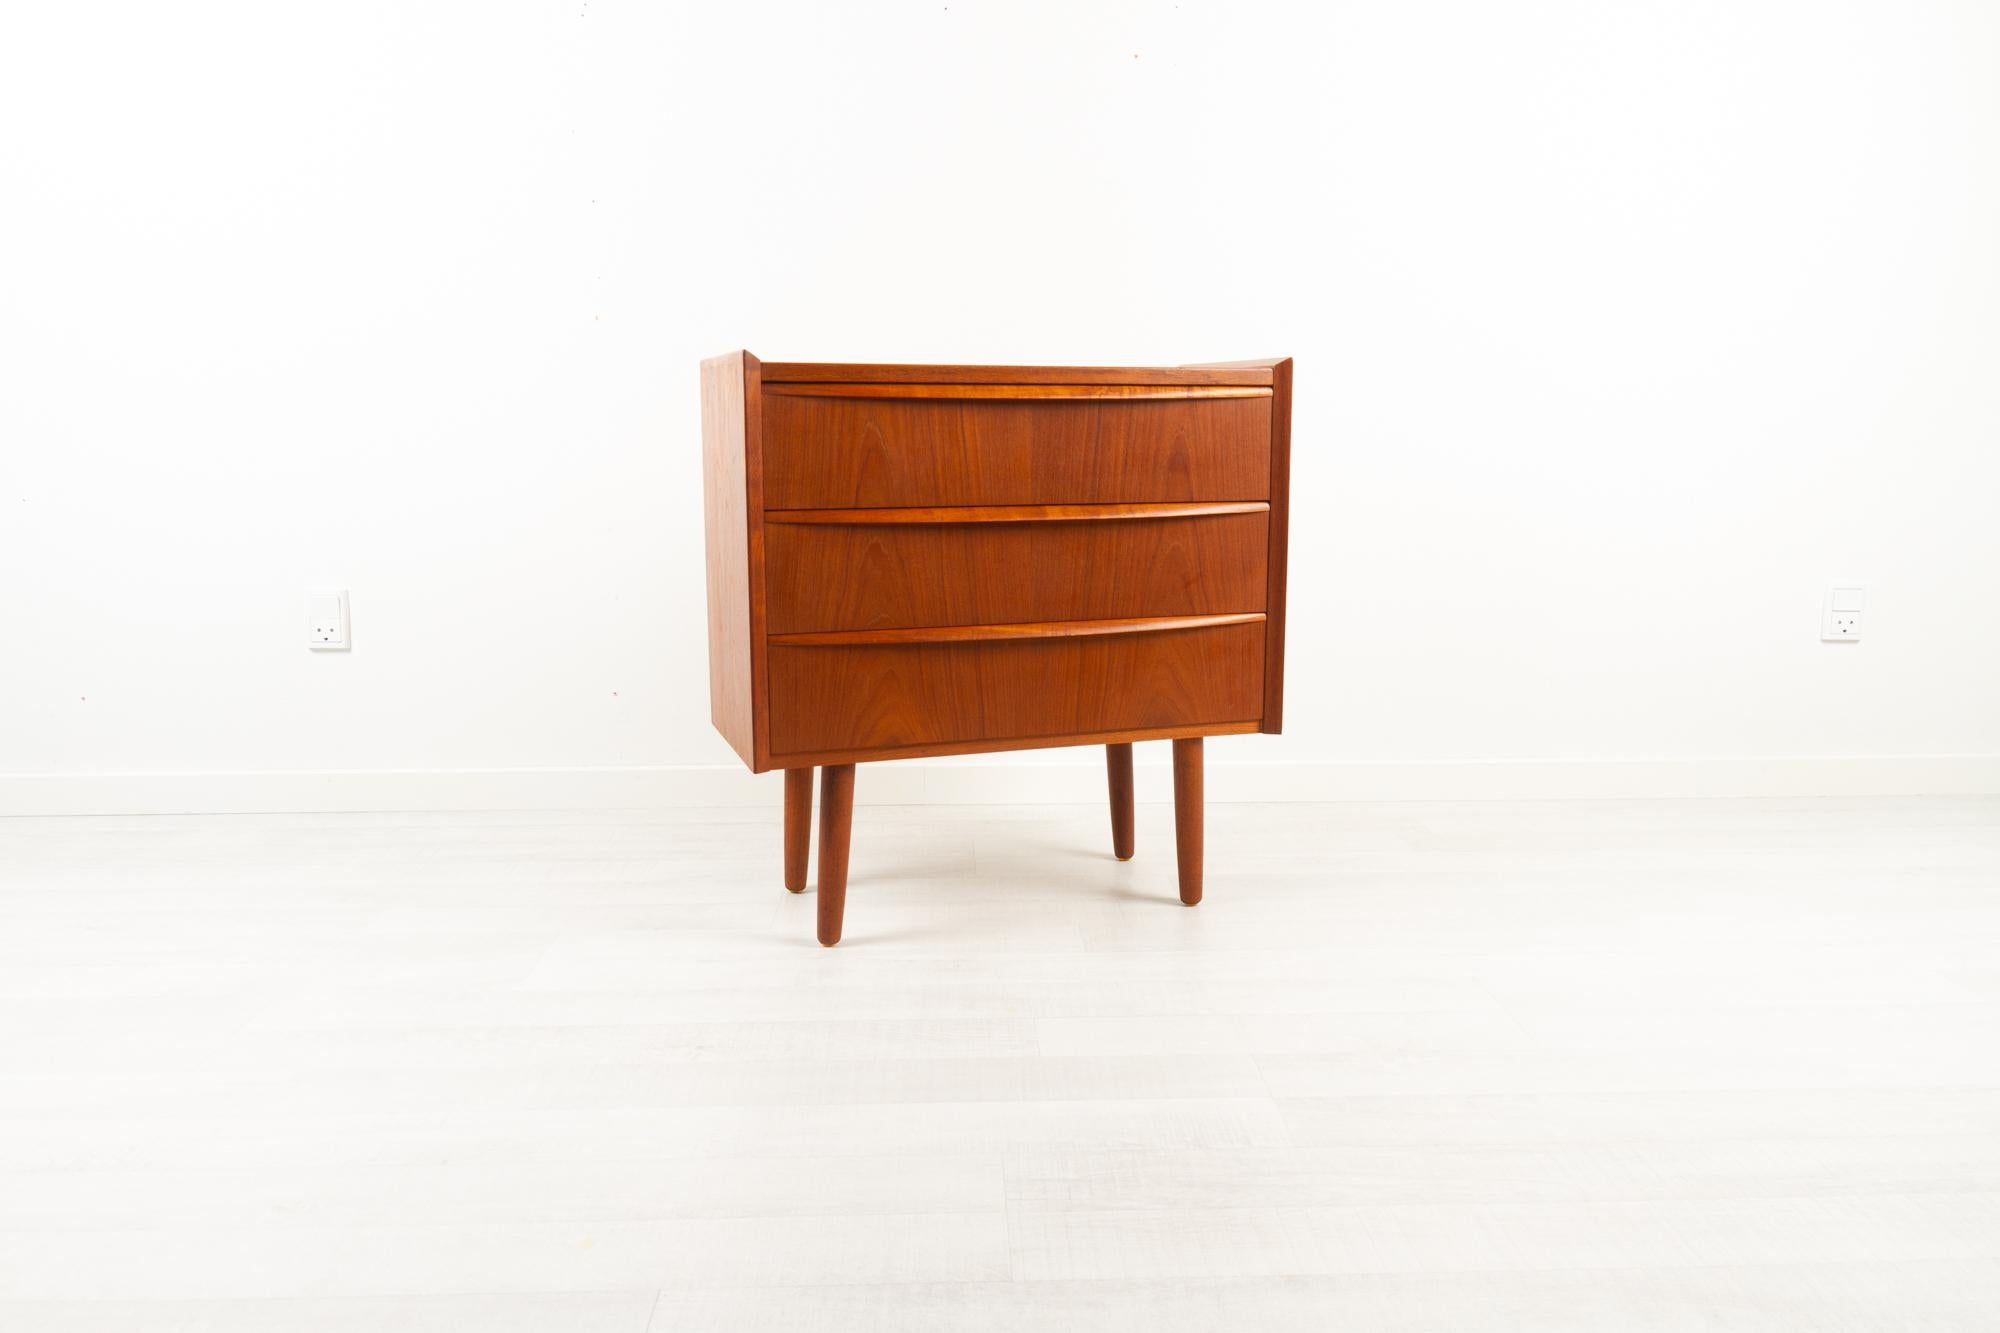 Vintage Danish teak dresser 1960s
Elegant Danish Mid-Century Modern chest of drawers. Three wide drawers with full length organic shaped pulls in solid teak. Frame with bevelled edged. Standing on four round tapered legs. Very beautiful and warm